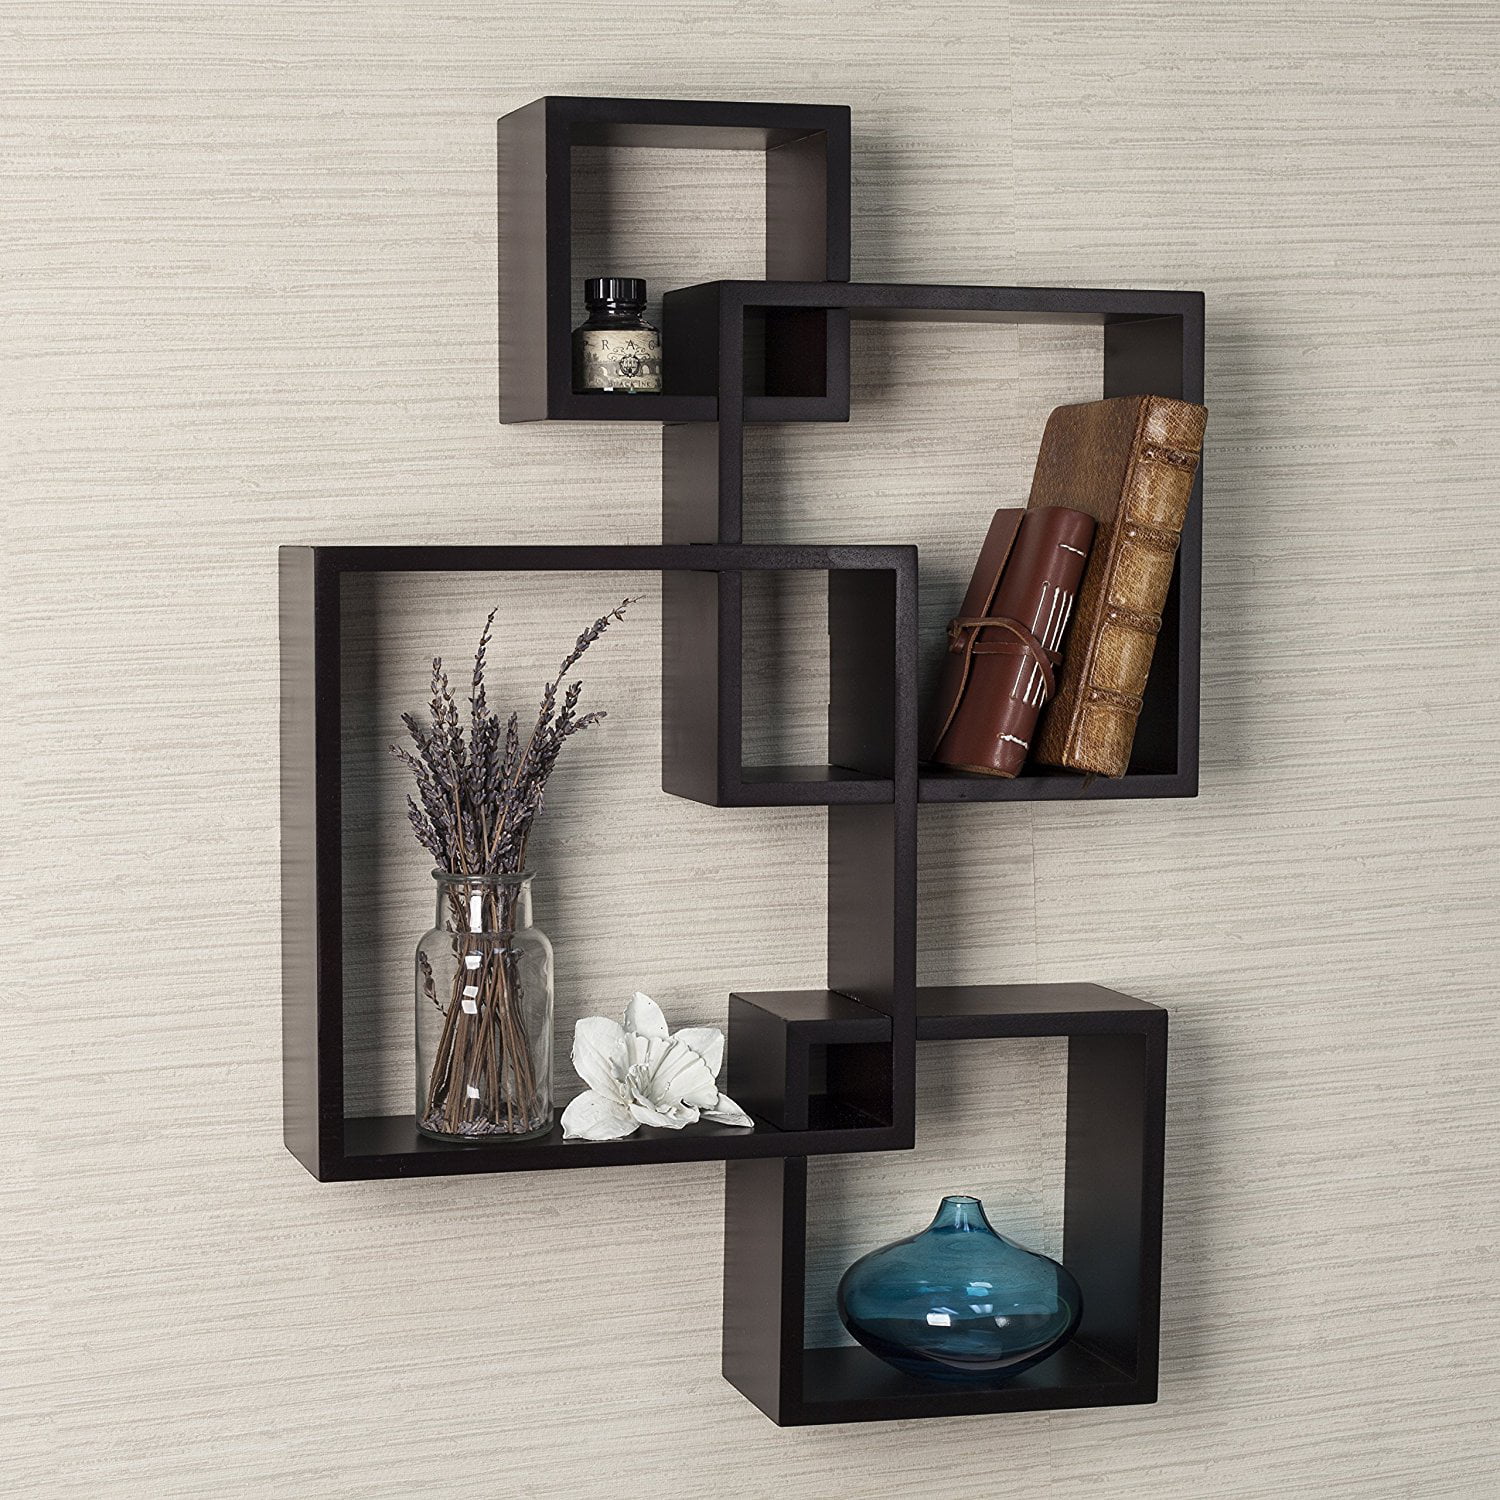 Ktaxon Large Floating Shelf Wall Mount, How To Mount Floating Shelves To The Wall